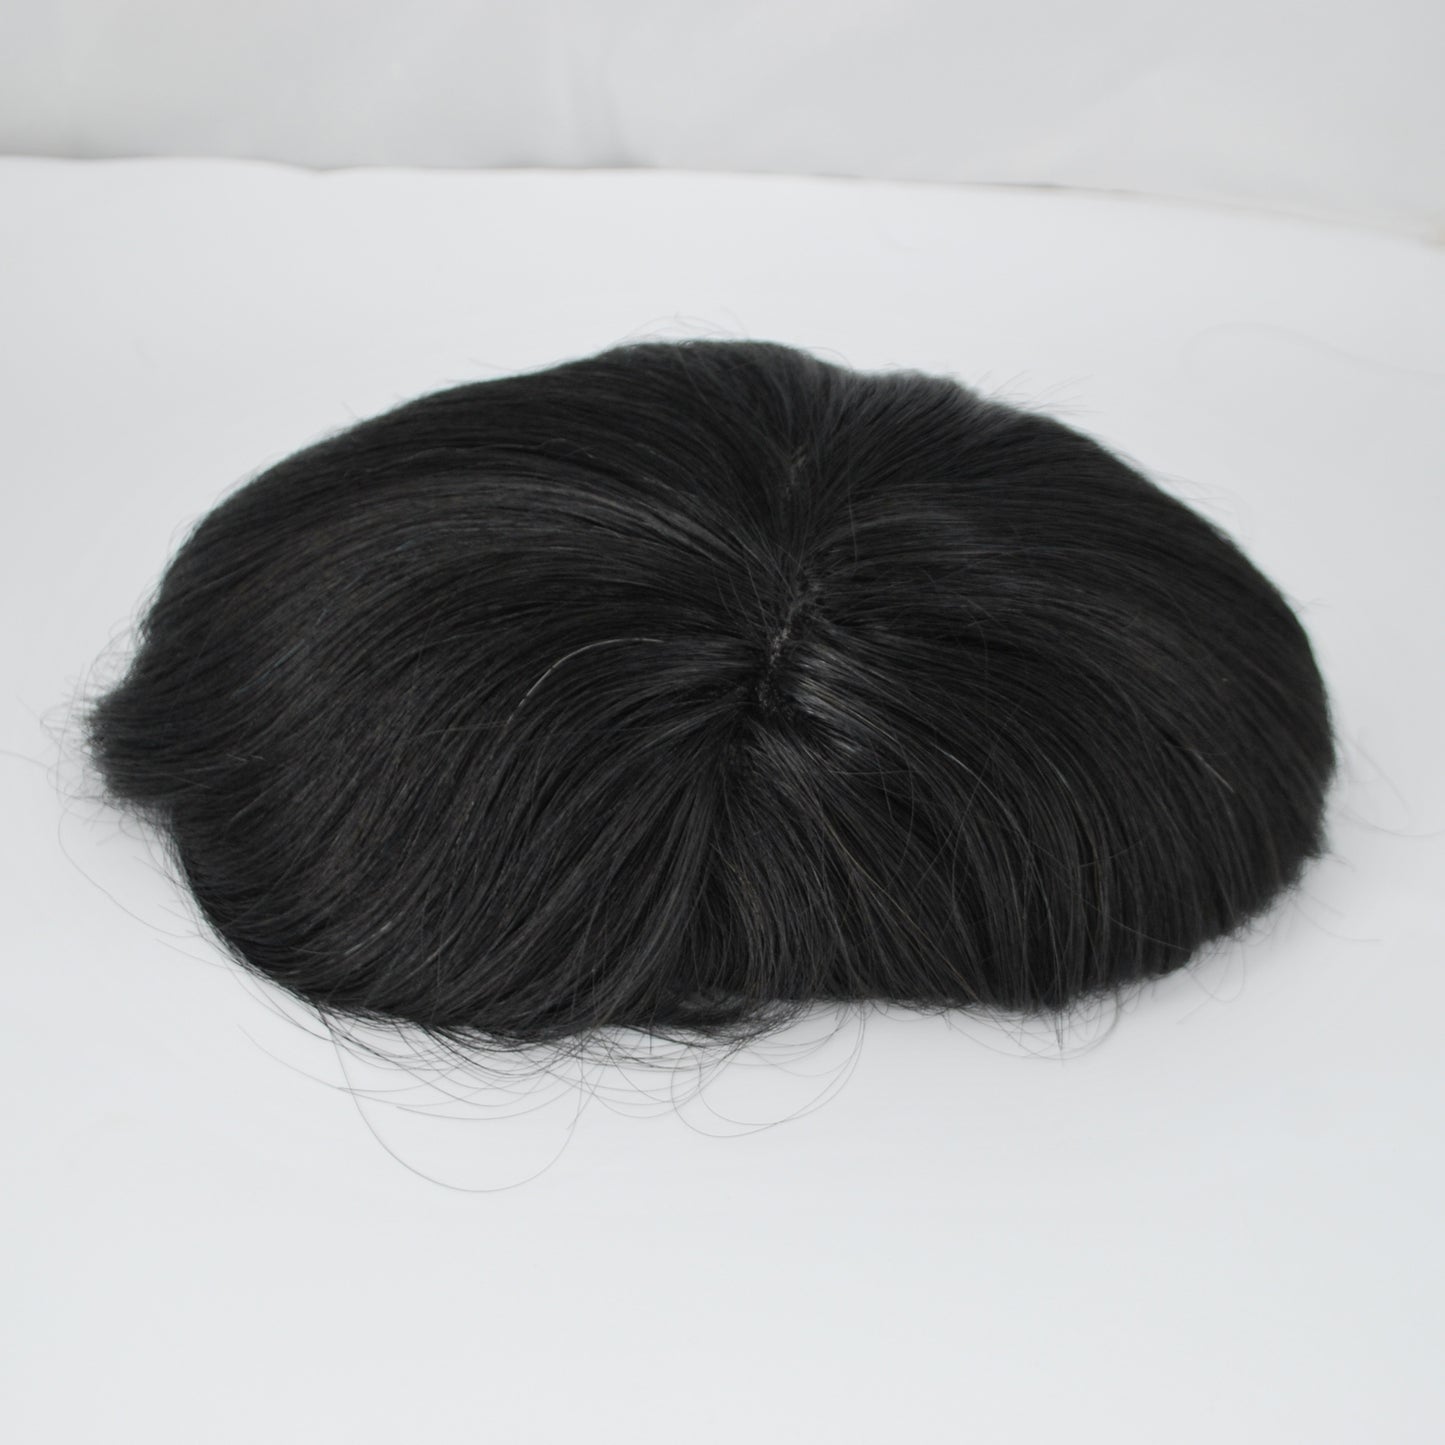 Clearance toupee #1 jet black toupee for men mono with PU around 9x7" human hair system